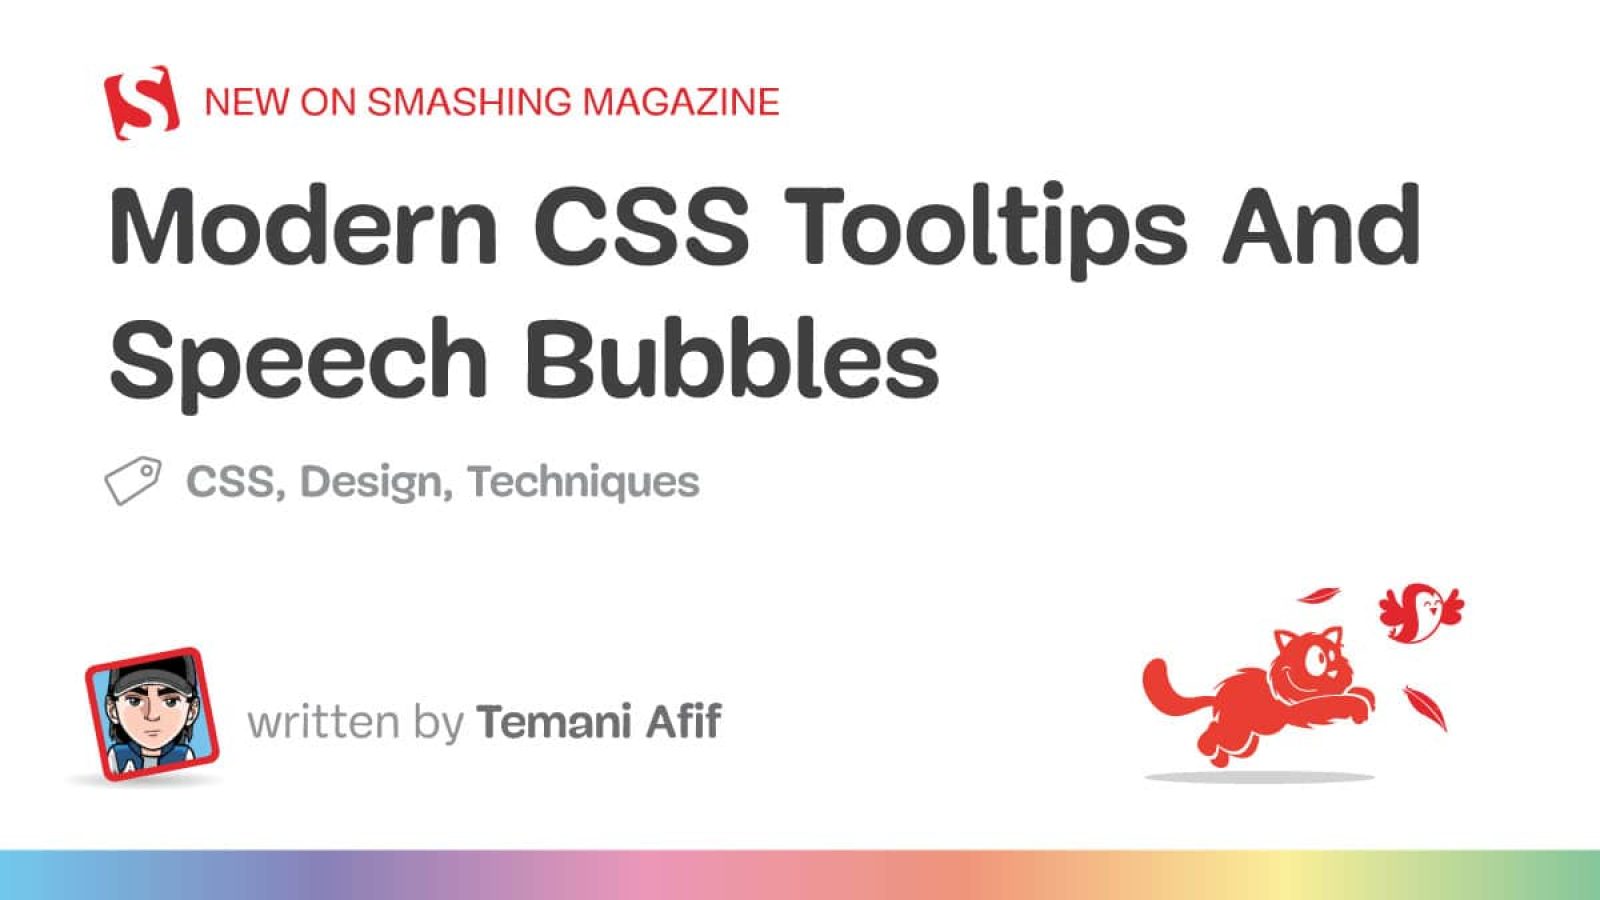 Fashionable CSS Tooltips And Speech Bubbles (Half 2)